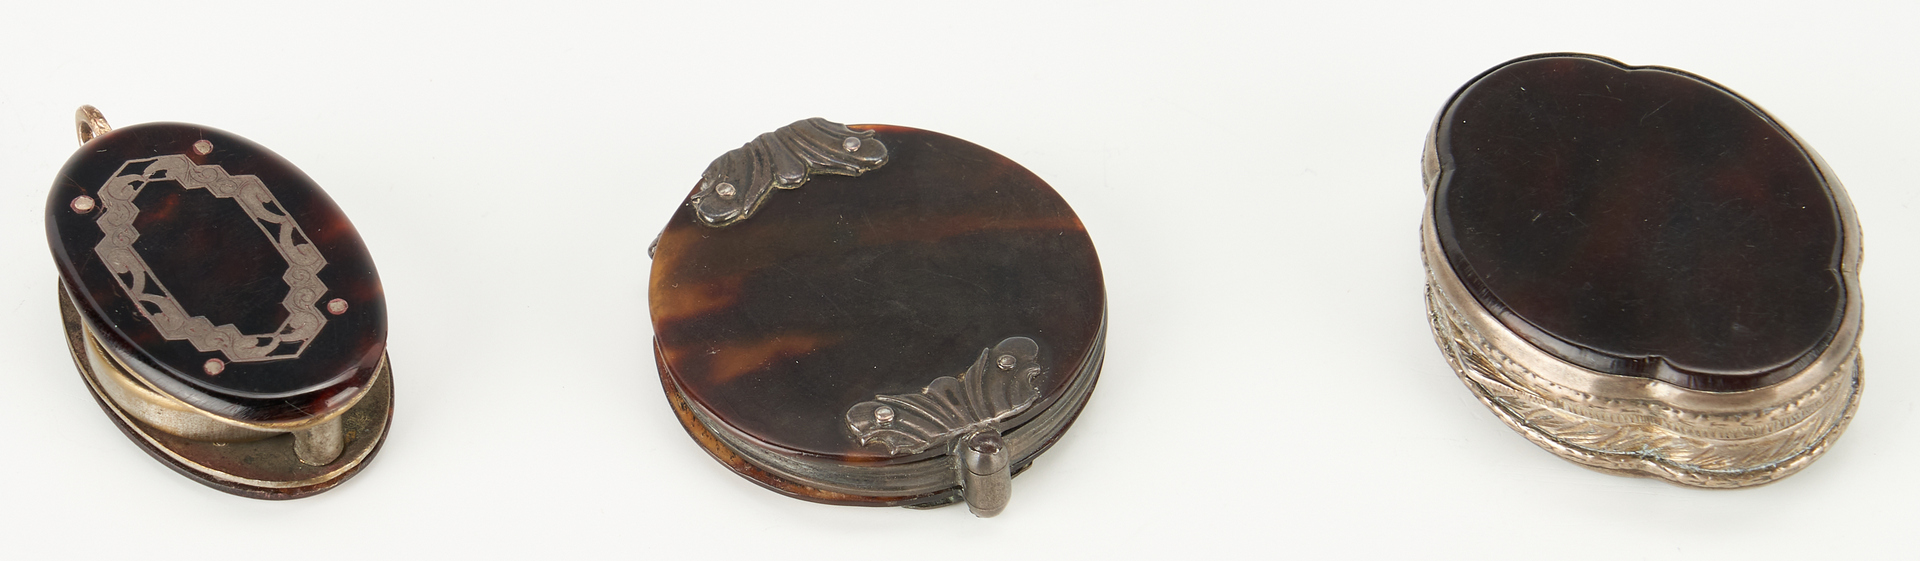 Lot 79: 4 Tortoiseshell Boxes and 2 Magnifiers, 6 items